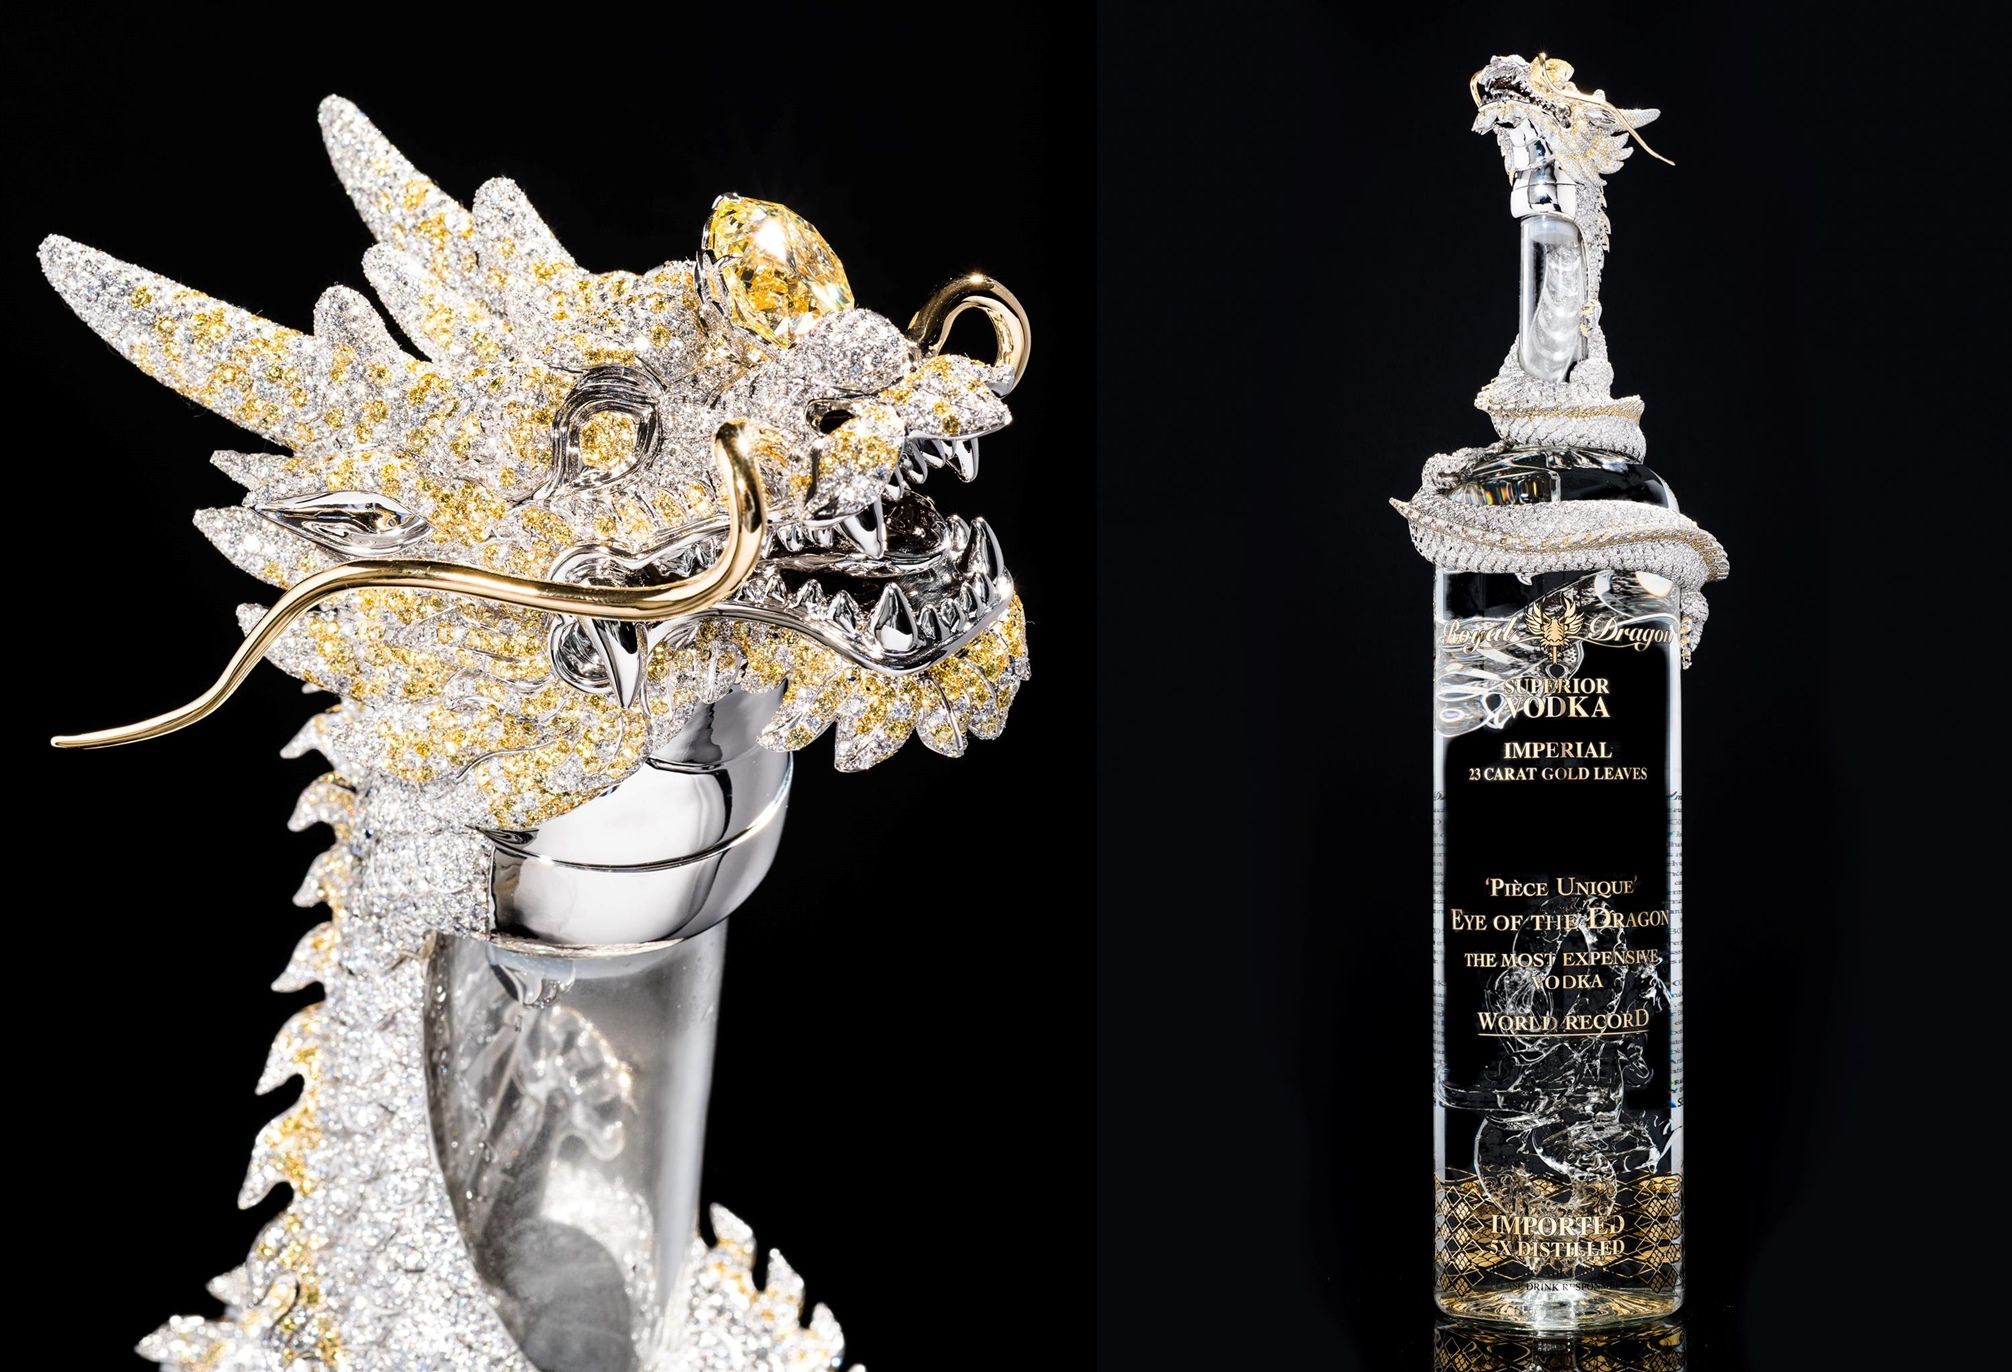 Seems legit: The most expensive vodka in the world